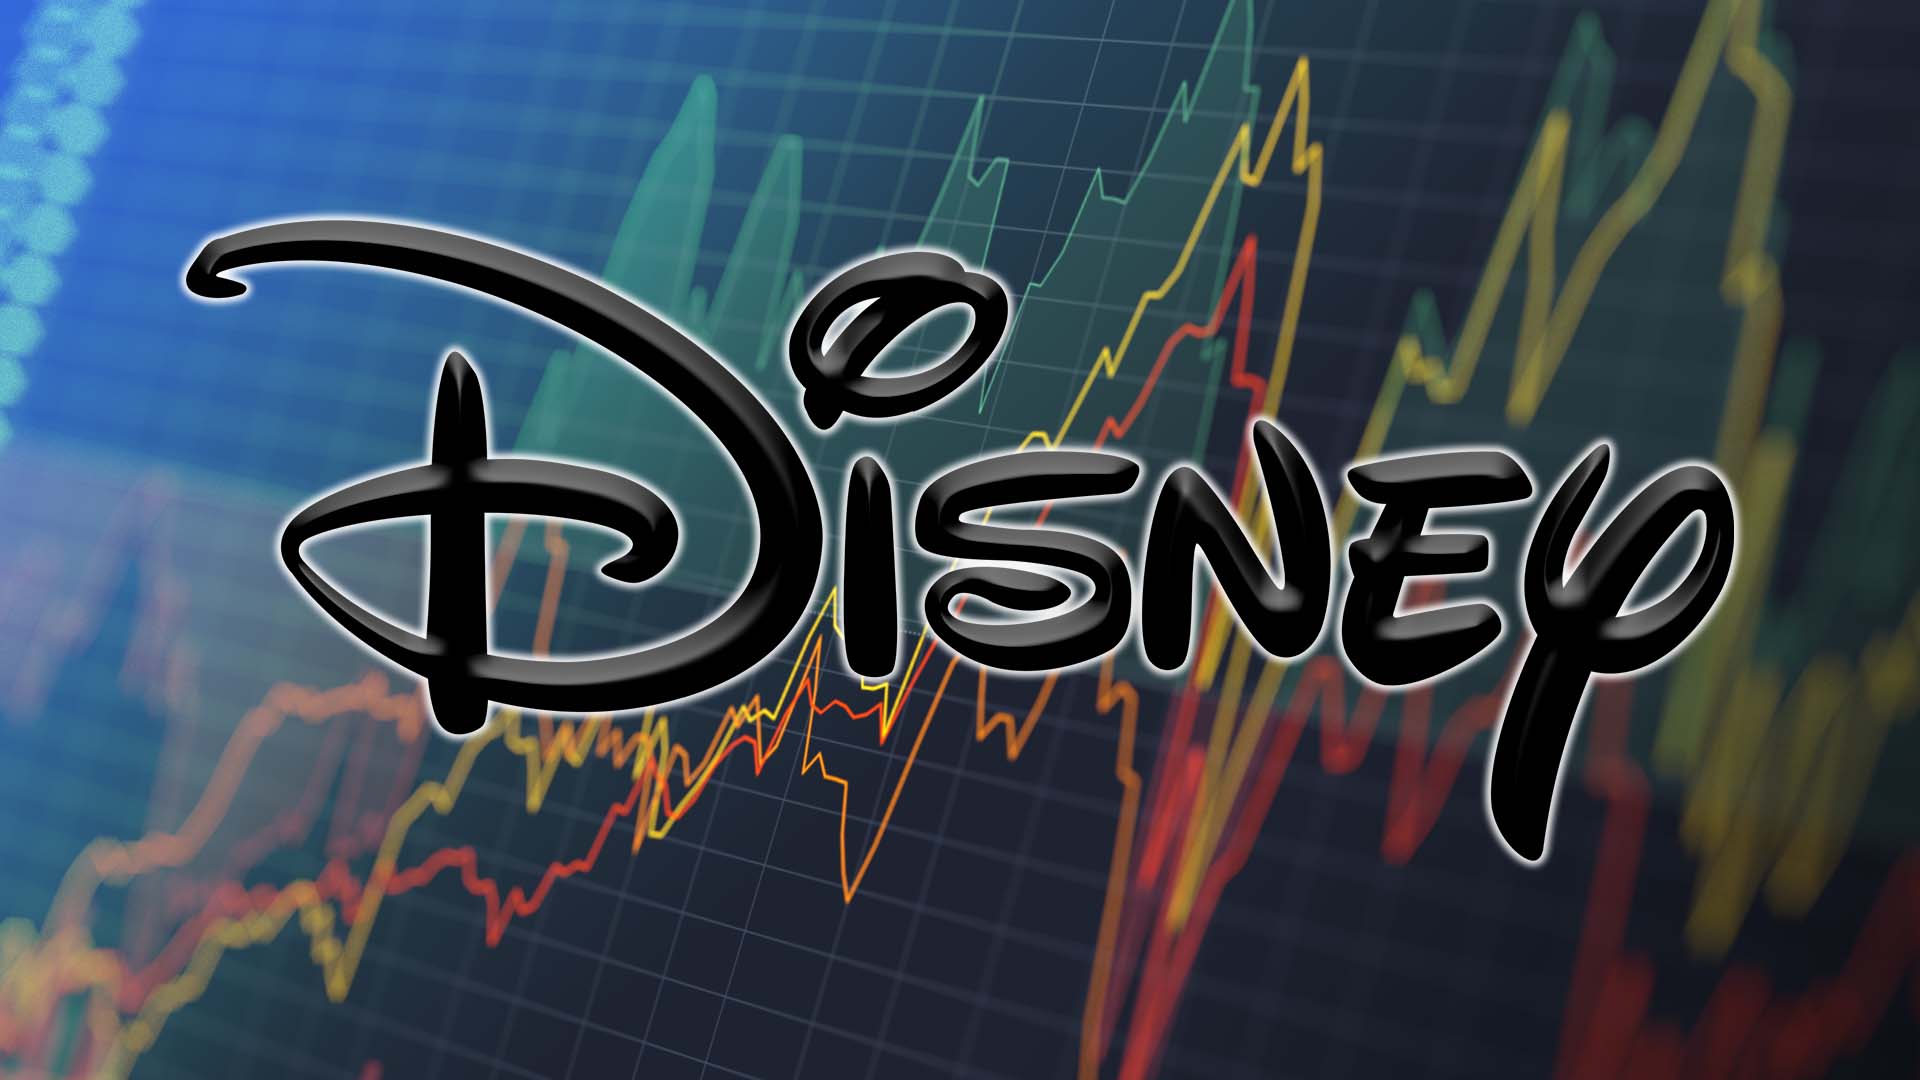 Walt Disney Company (NYSE: DIS) Stock Price Facing Sustainability Issues?